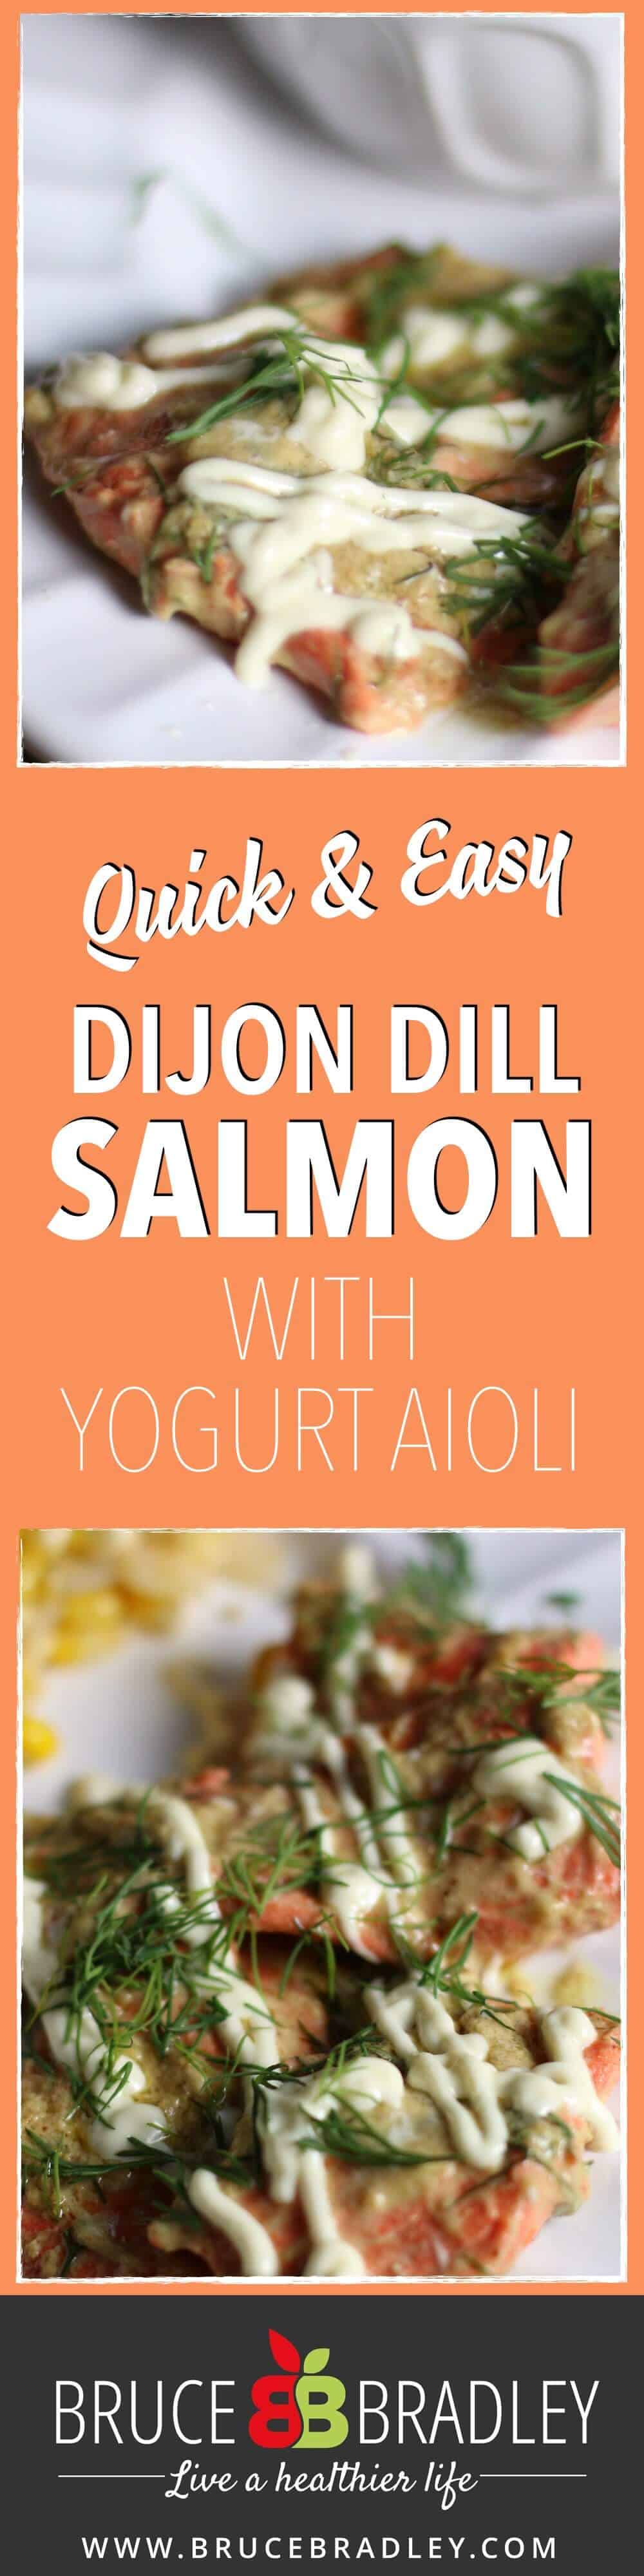 A Delicious Restaurant-Inspired Salmon Recipe With Mustard, Dill, Lemon Juice And Garnished With Aioli!